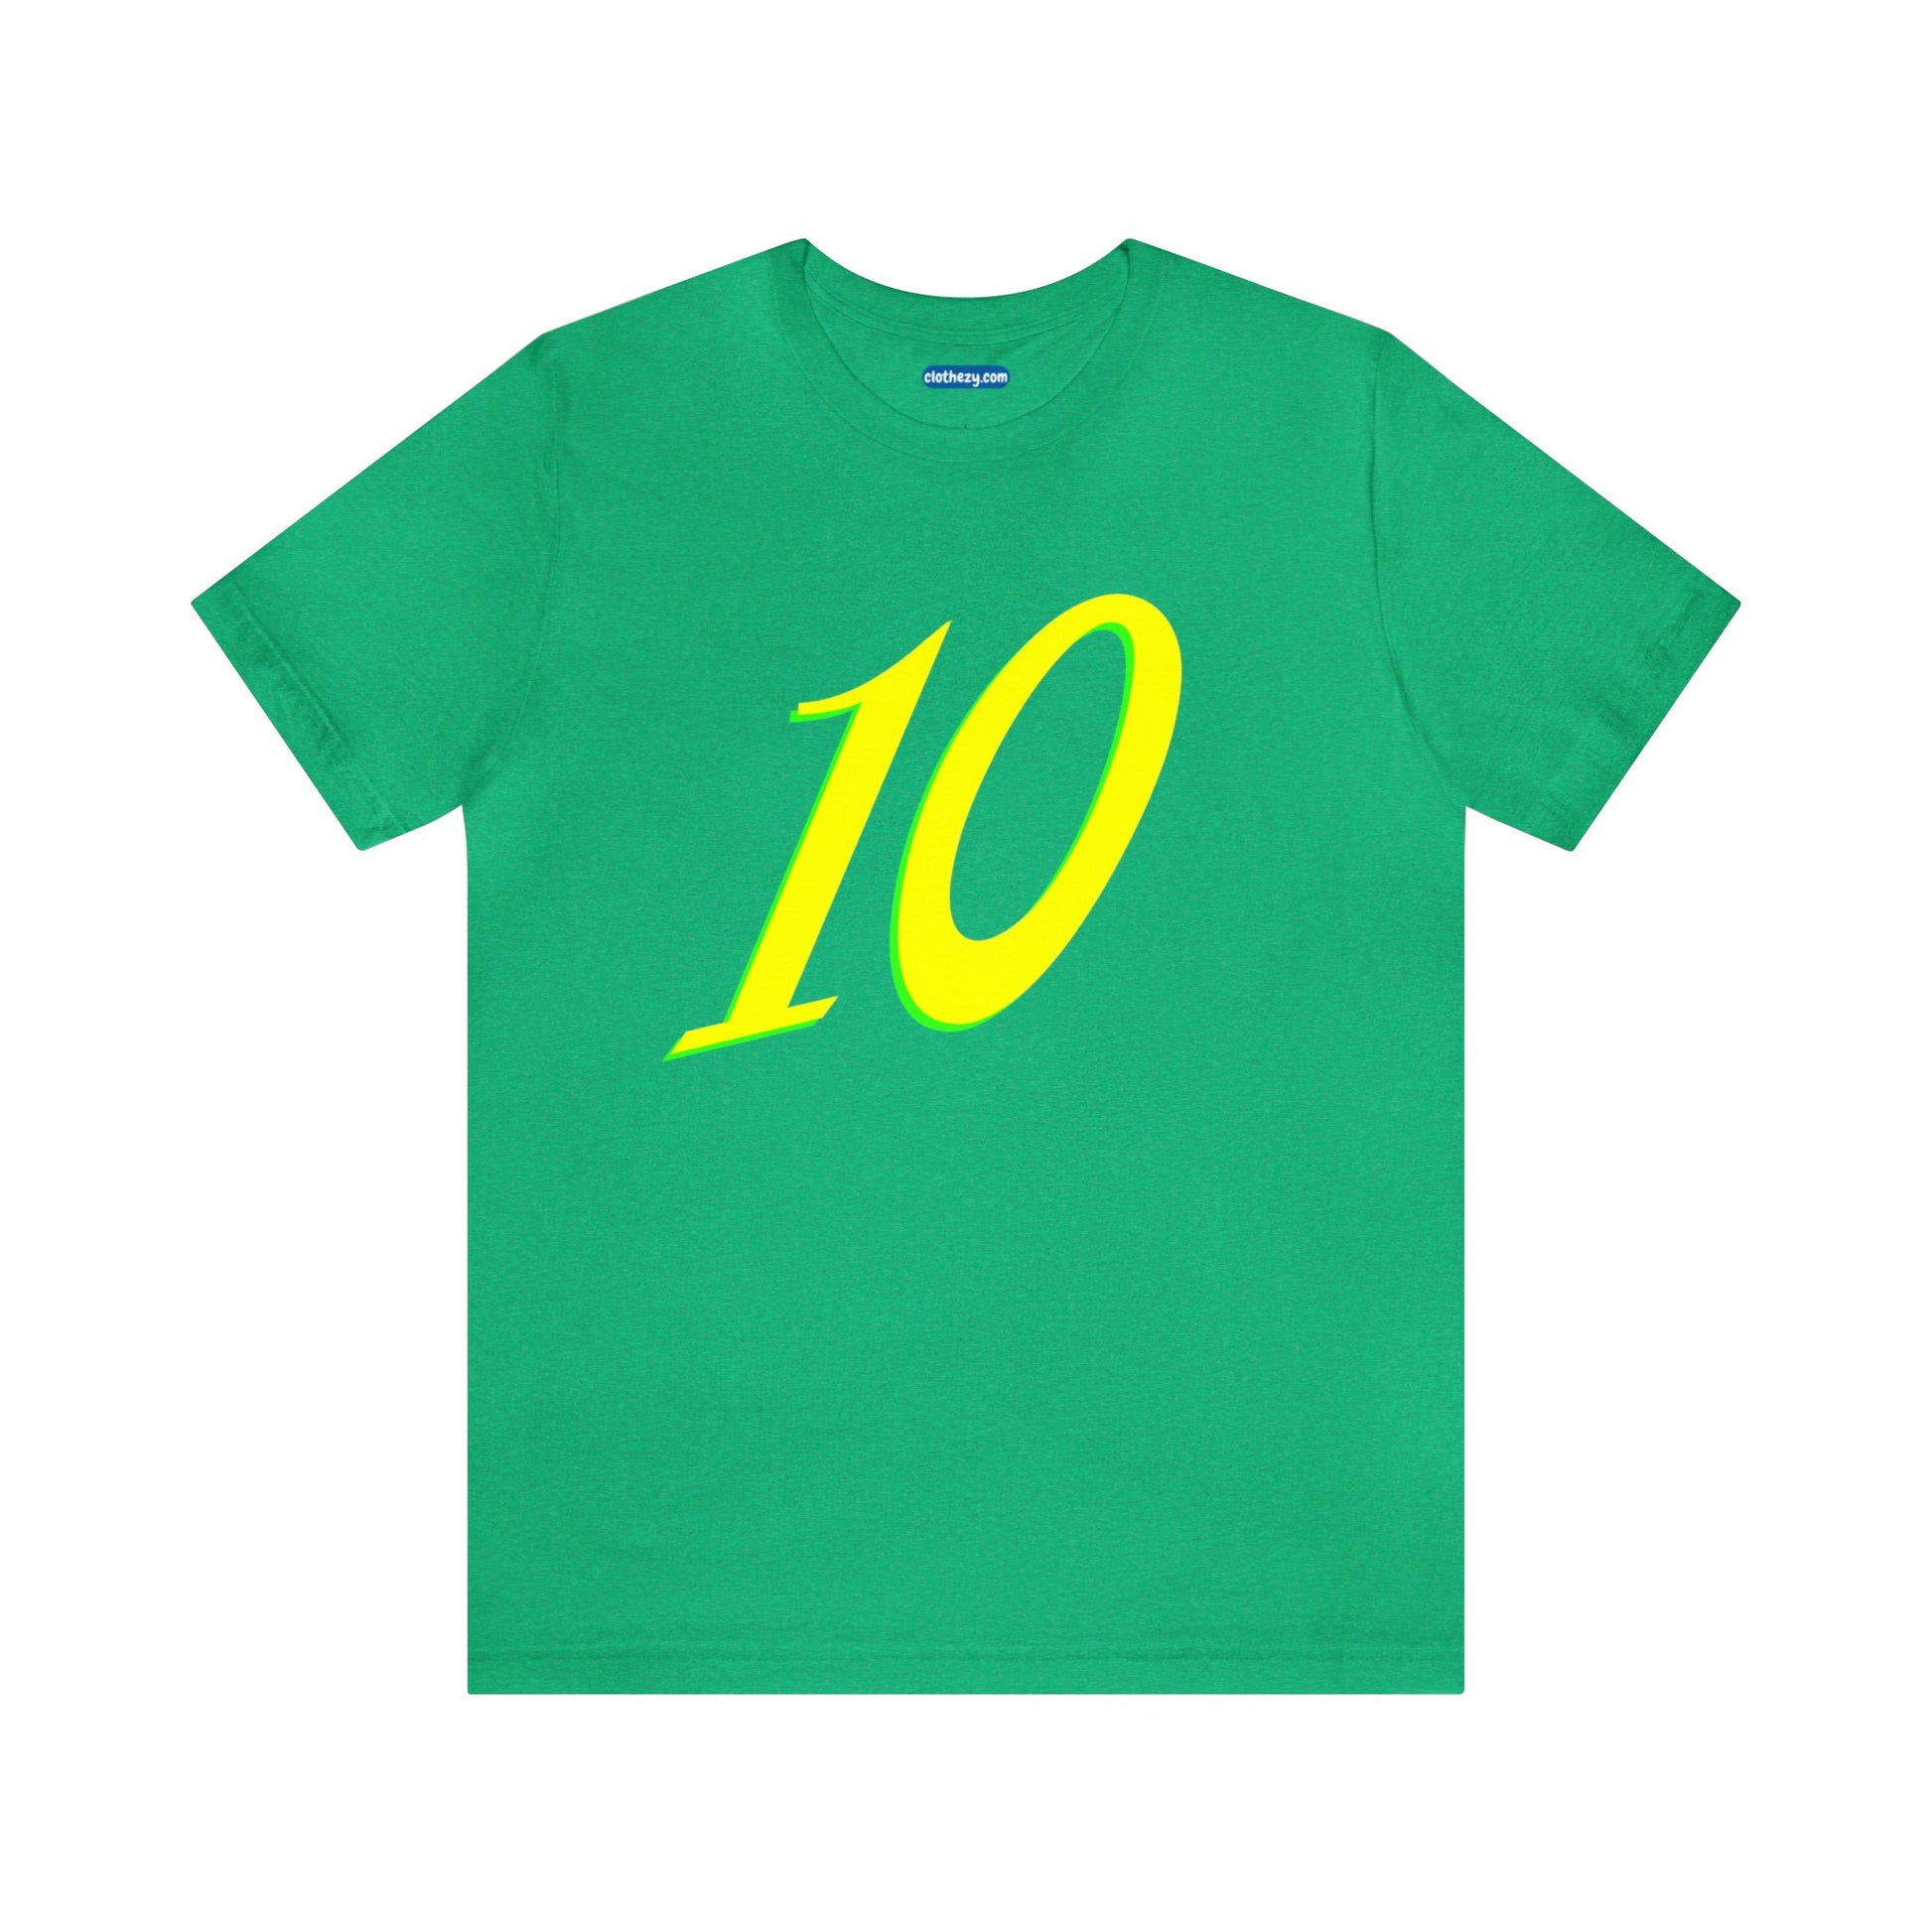 Number 10 Design - Soft Cotton Tee for birthdays and celebrations, Gift for friends and family, Multiple Options by clothezy.com in Green Heather Size Small - Buy Now